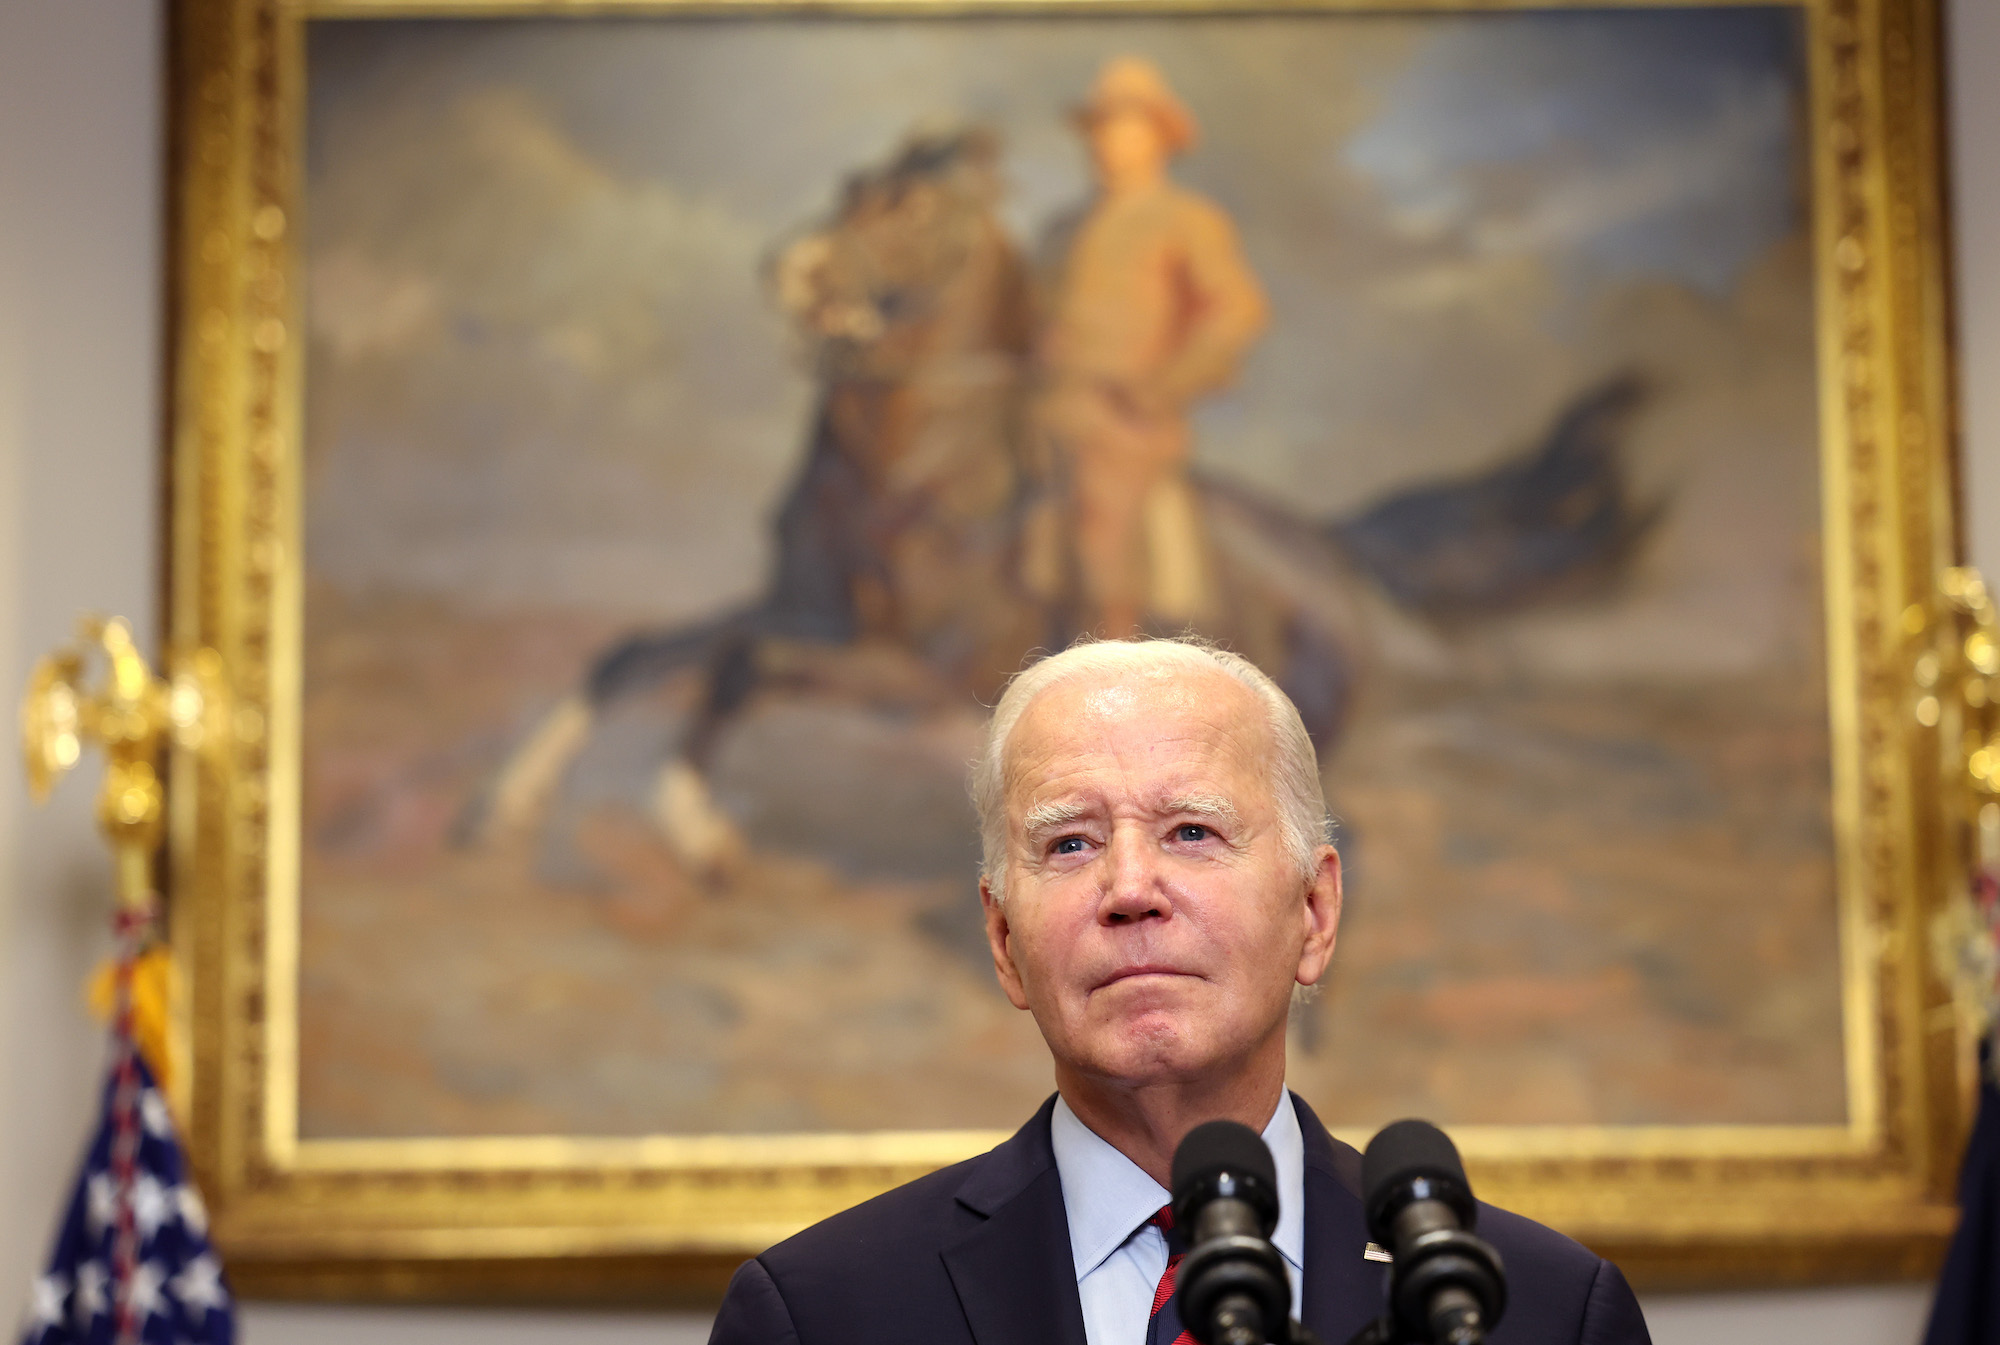 President Joe Biden delivers remarks at the White House on Wednesday.